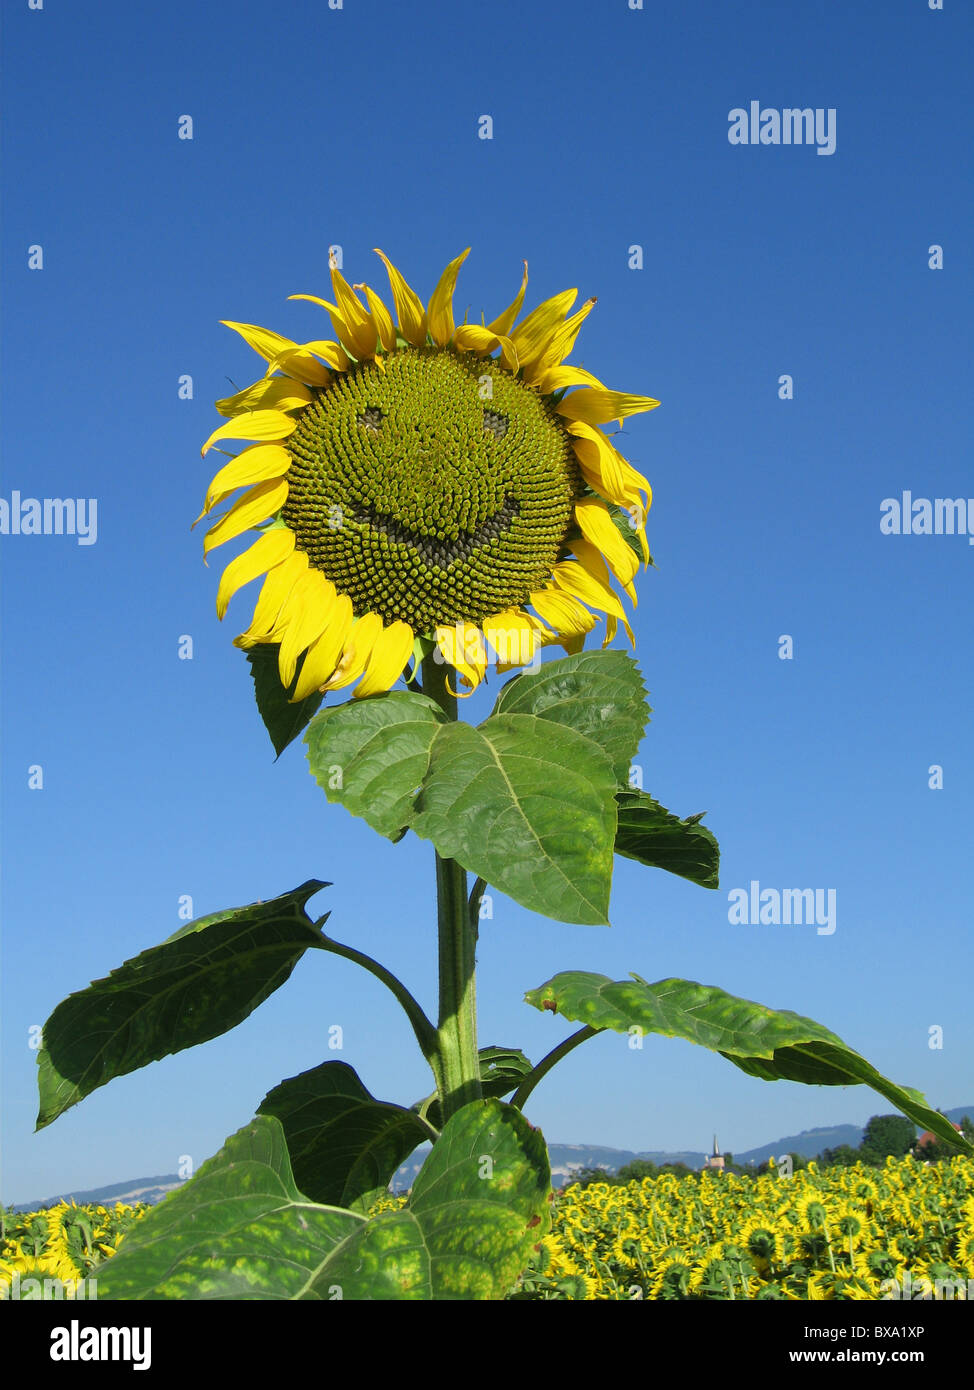 A funny sunflower with a big smile Stock Photo